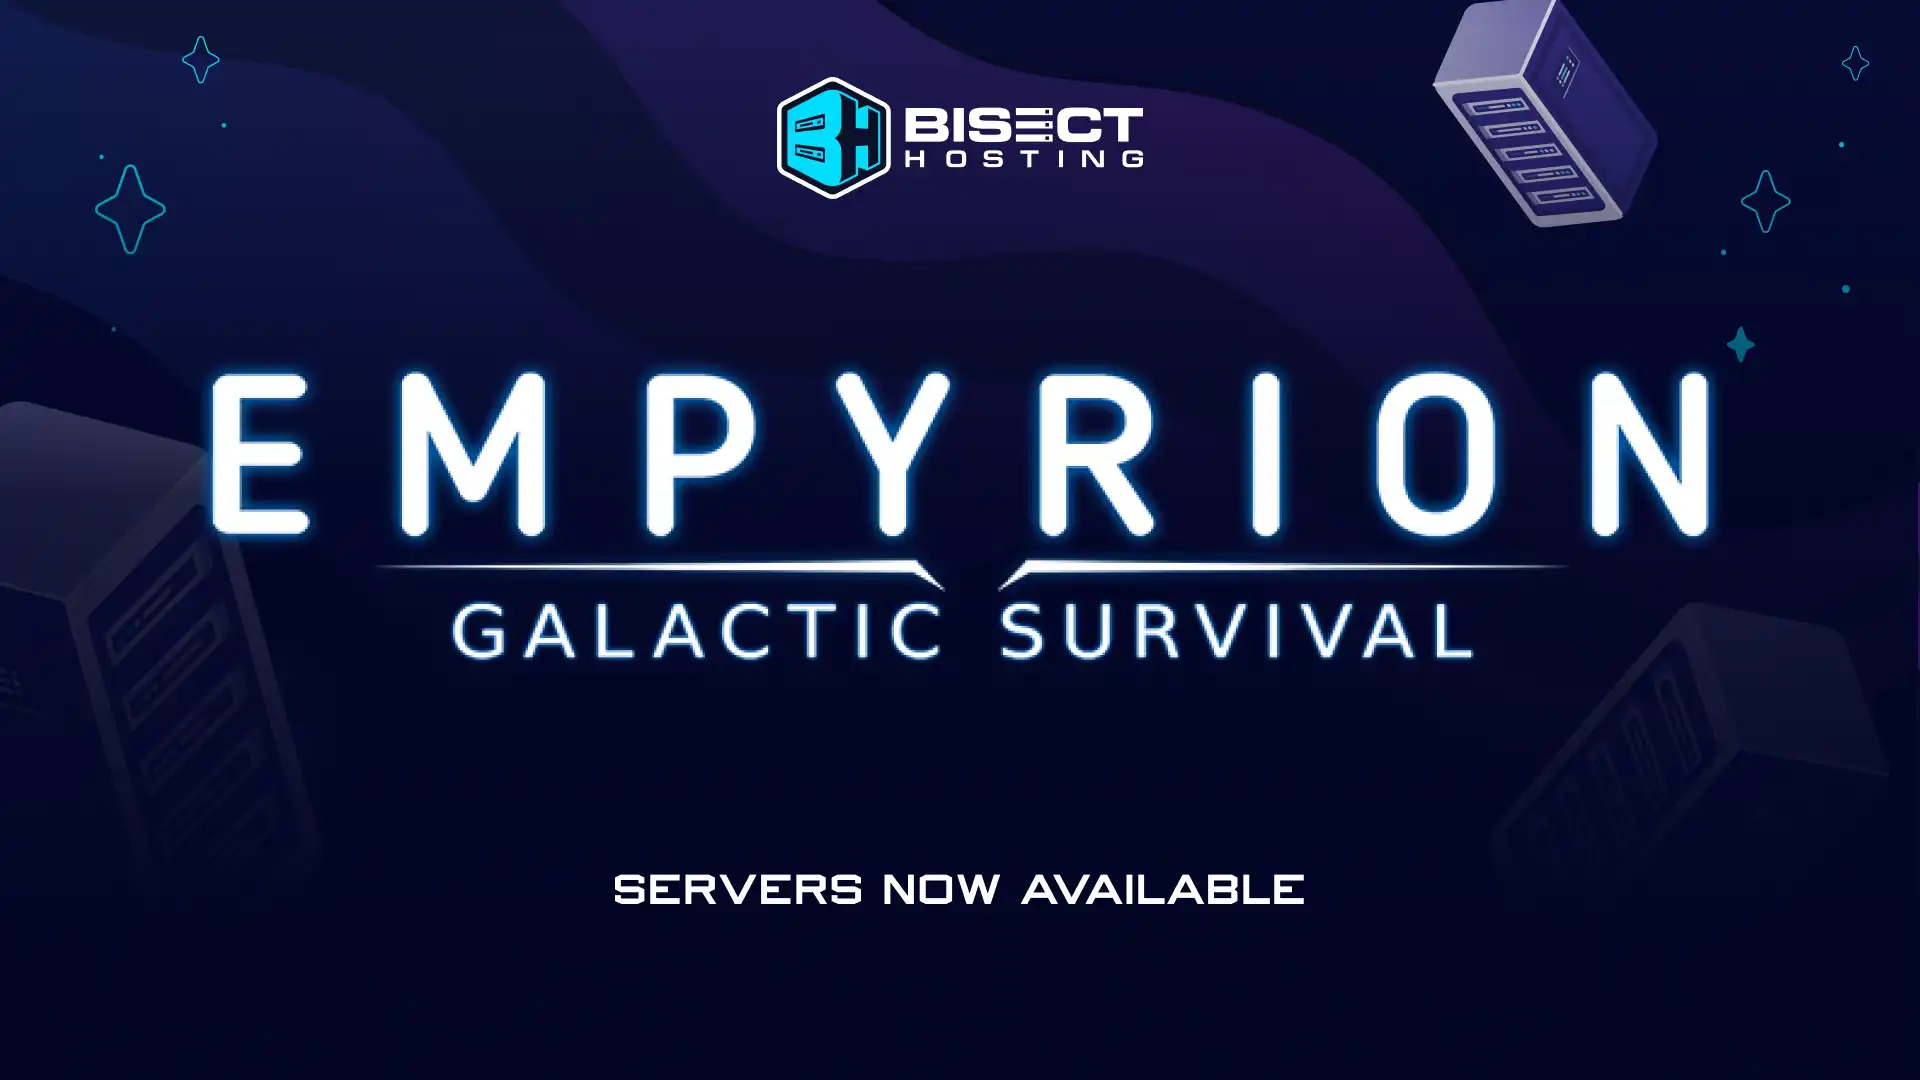 Empyrion – Galactic Survival Server Hosting Available Now With BisectHosting